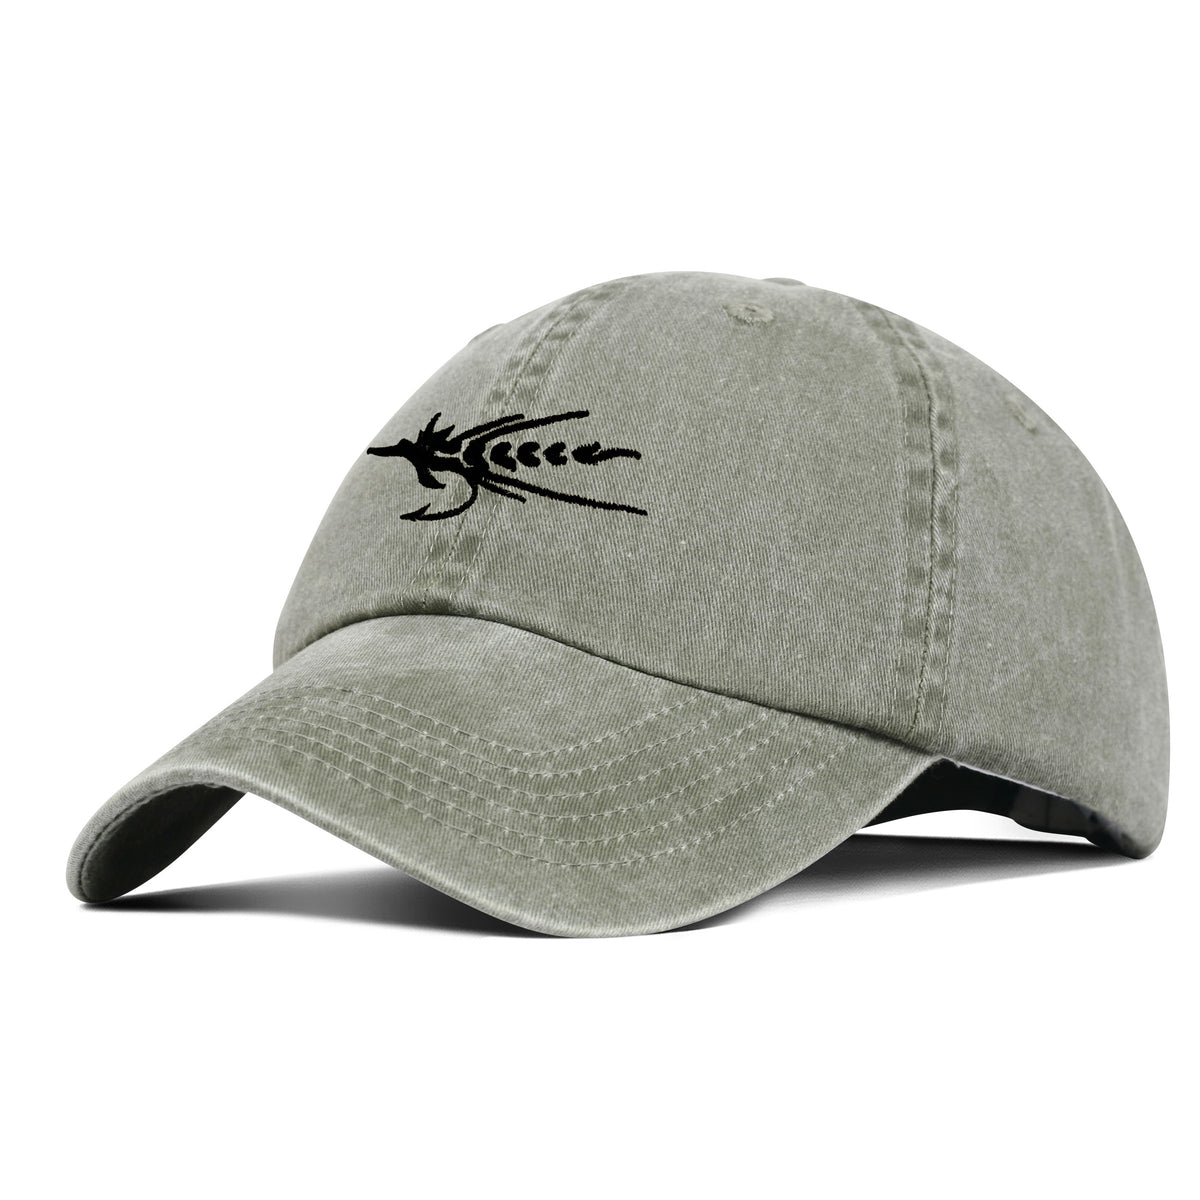 Black Fly Embroidered Hat - Cactus